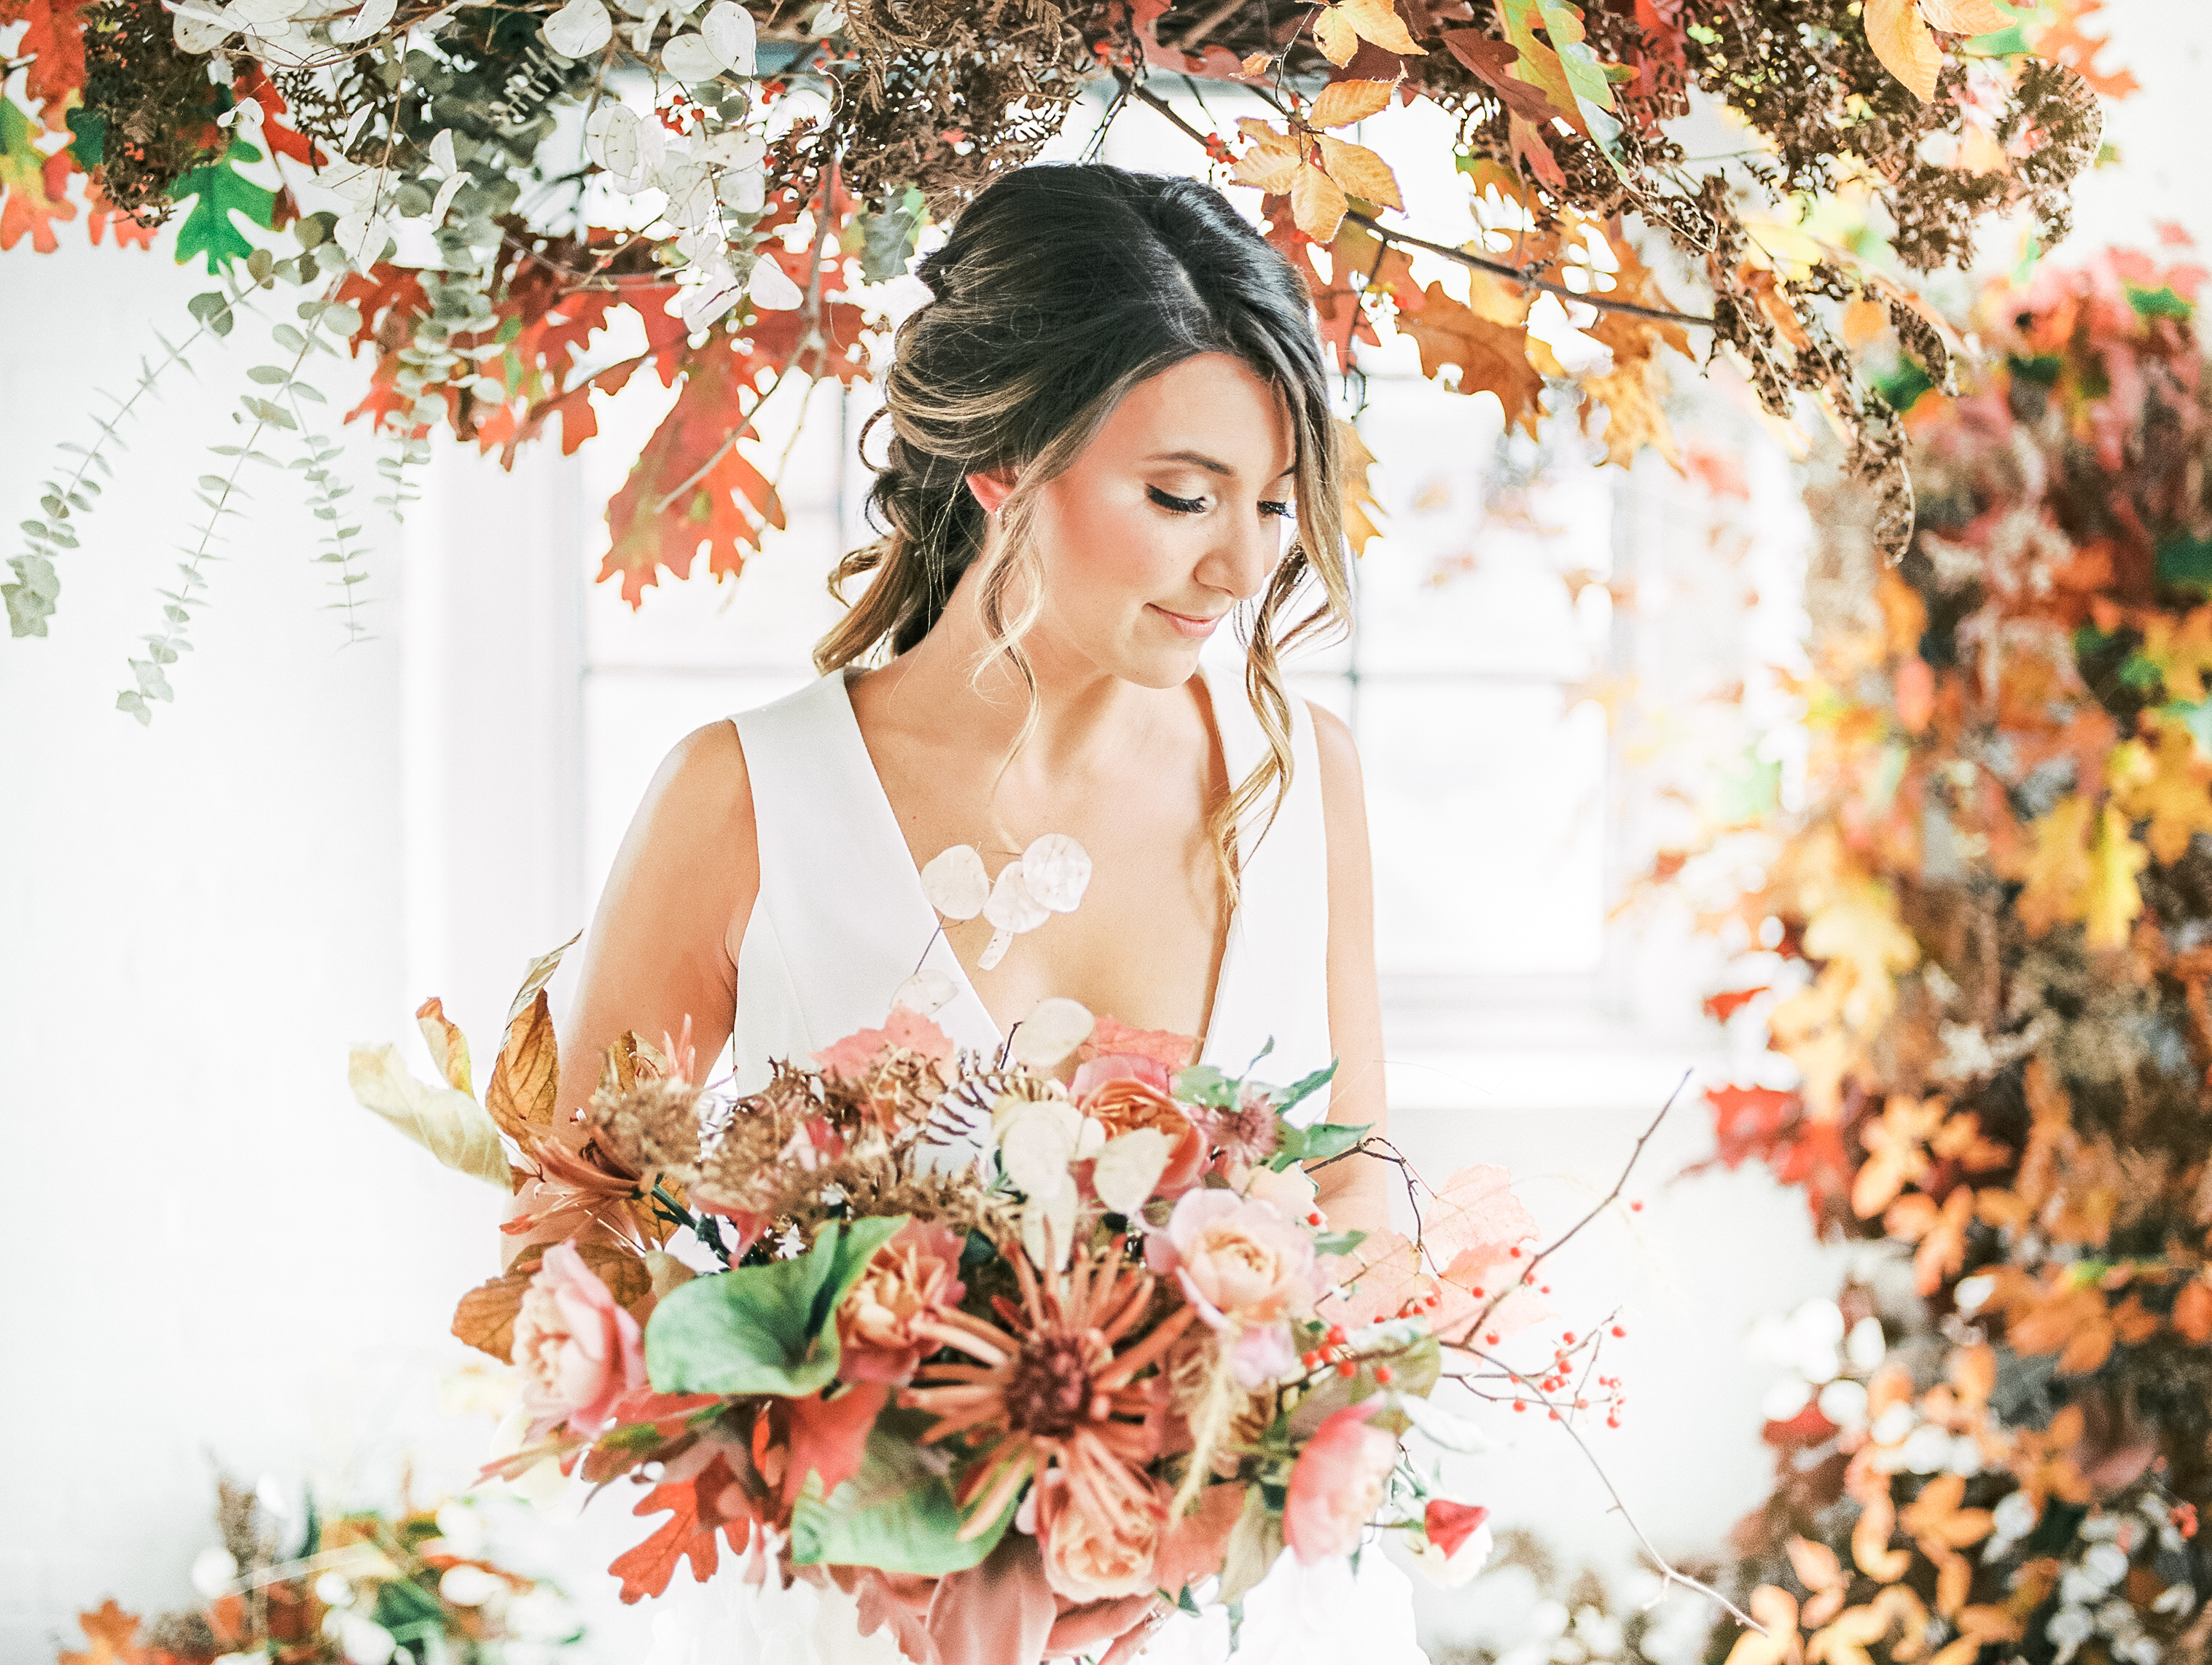 Fall Wedding Flowers | The Day's Design | Samantha James Phtoography